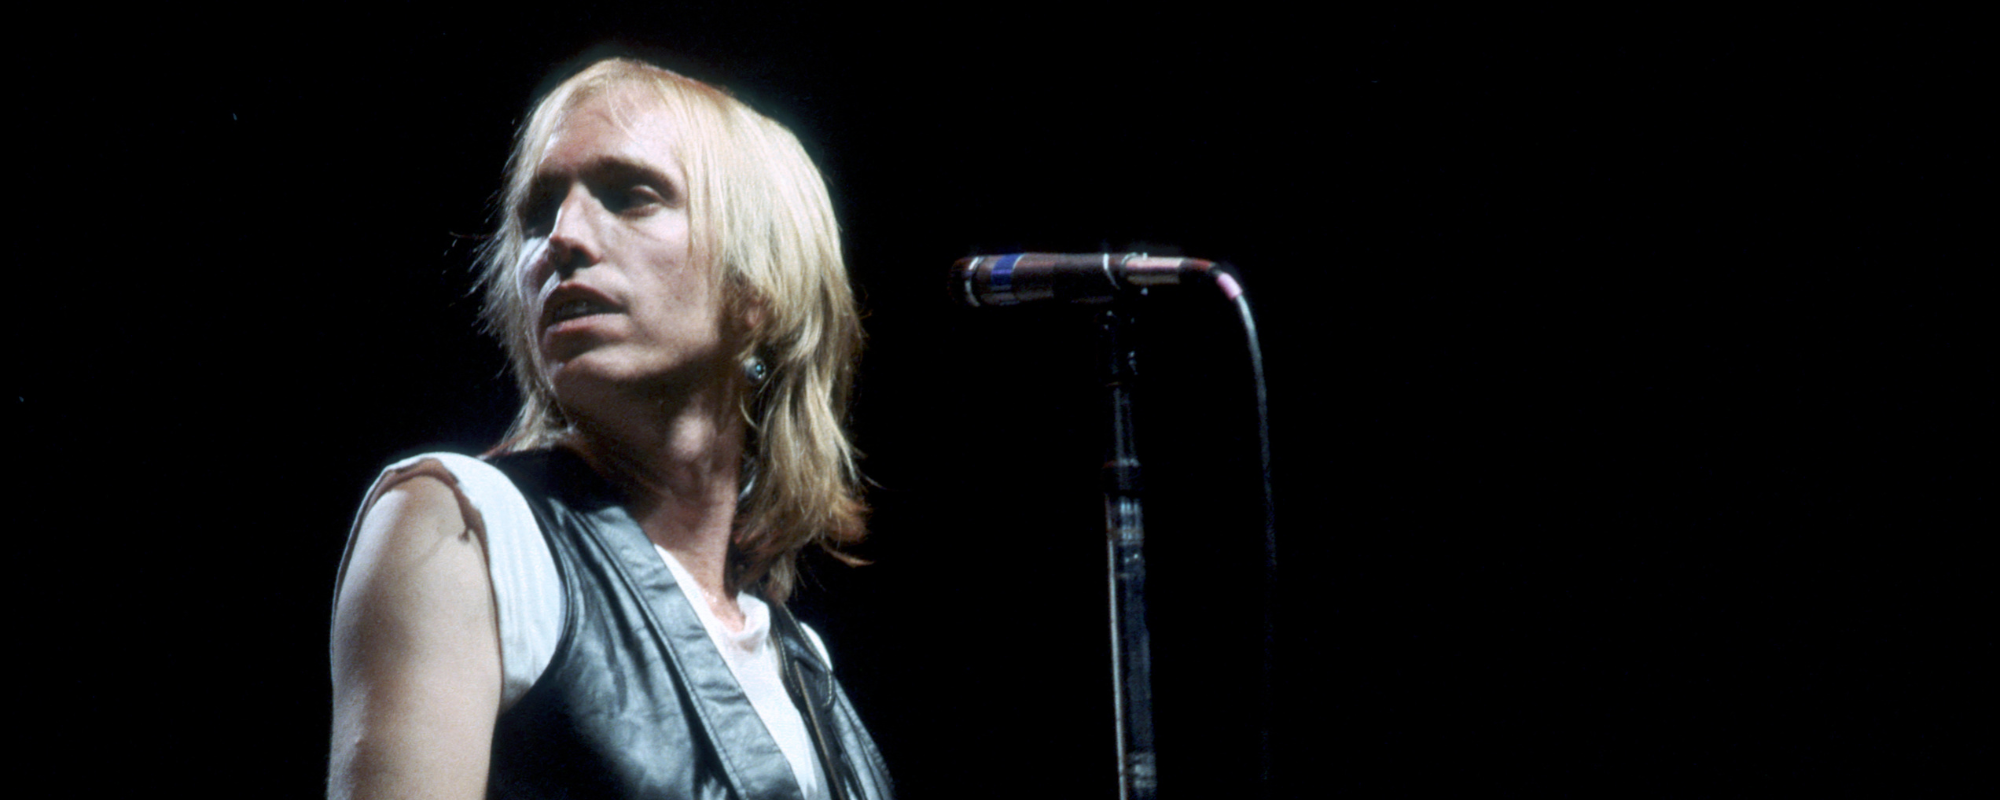 The Meaning Behind Tom Petty and the Heartbreakers’ Left-Field Ode to an ’80s Icon, “Don’t Come Around Here No More”